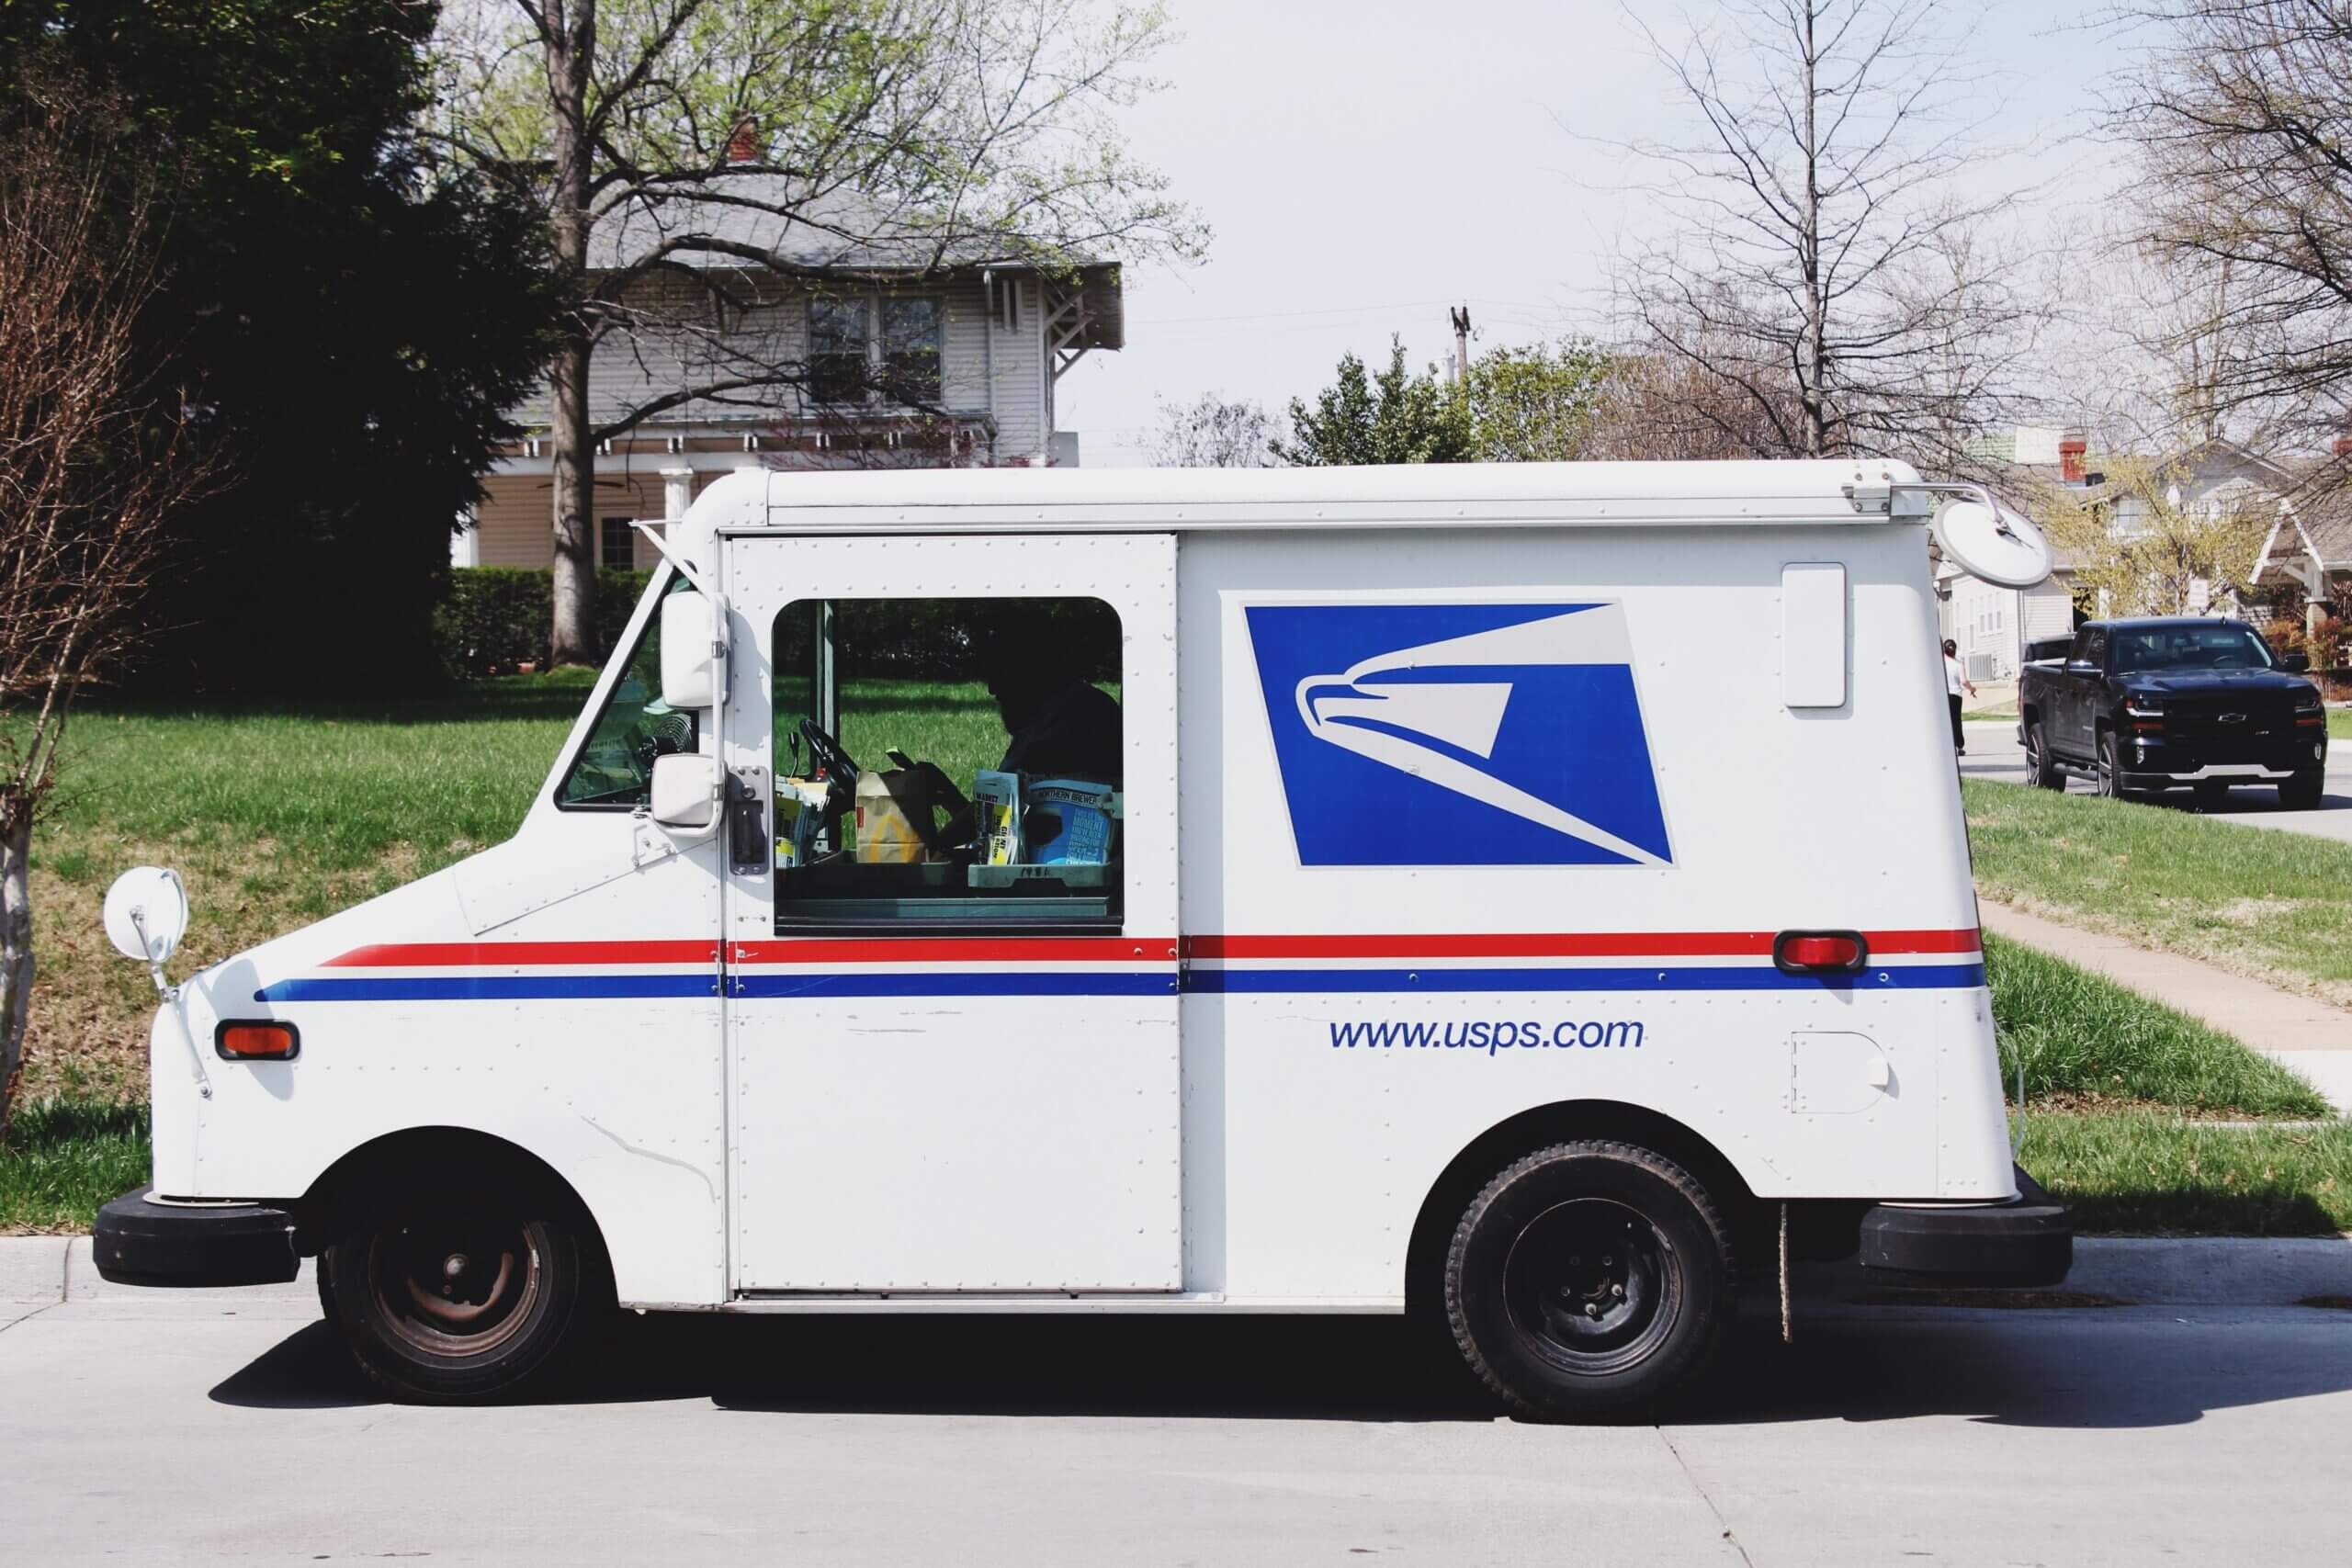 Mail service temporarily suspended for weather